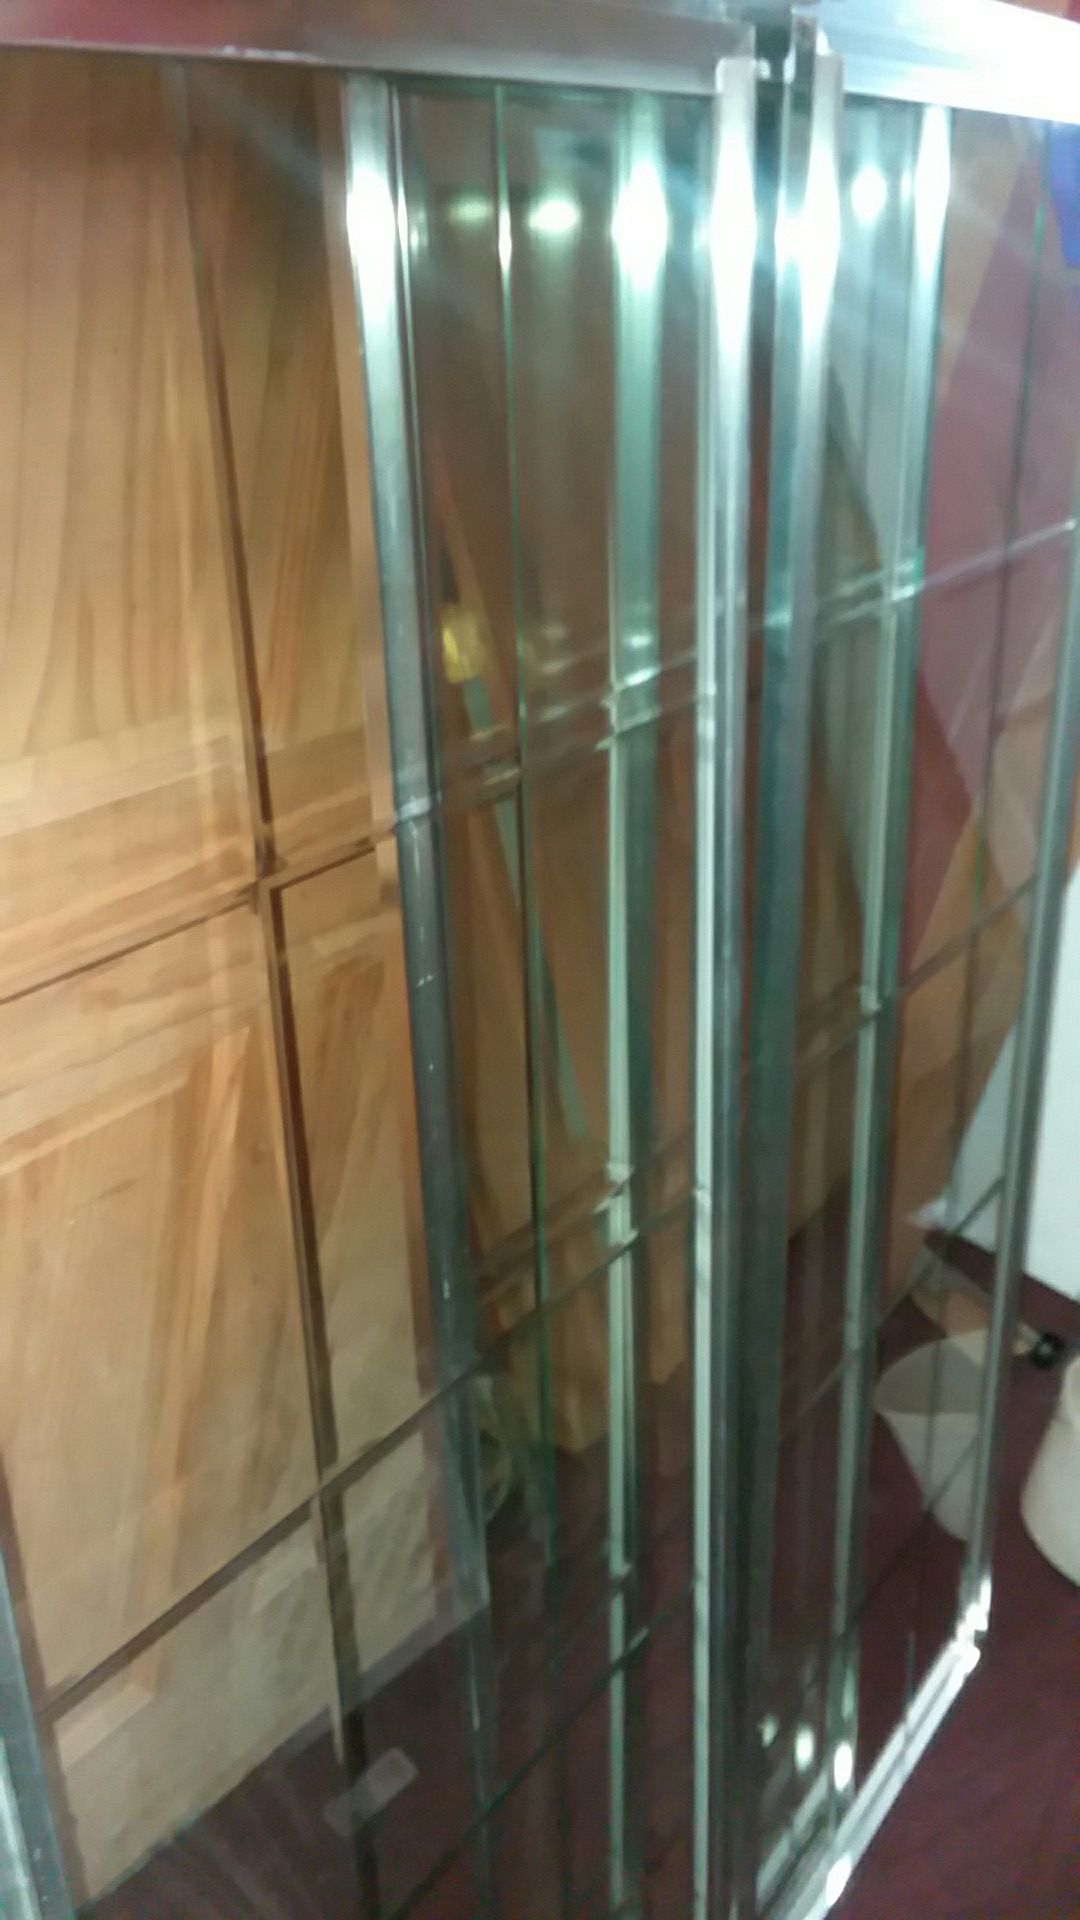 3 sliding shower doors and req 60" $25